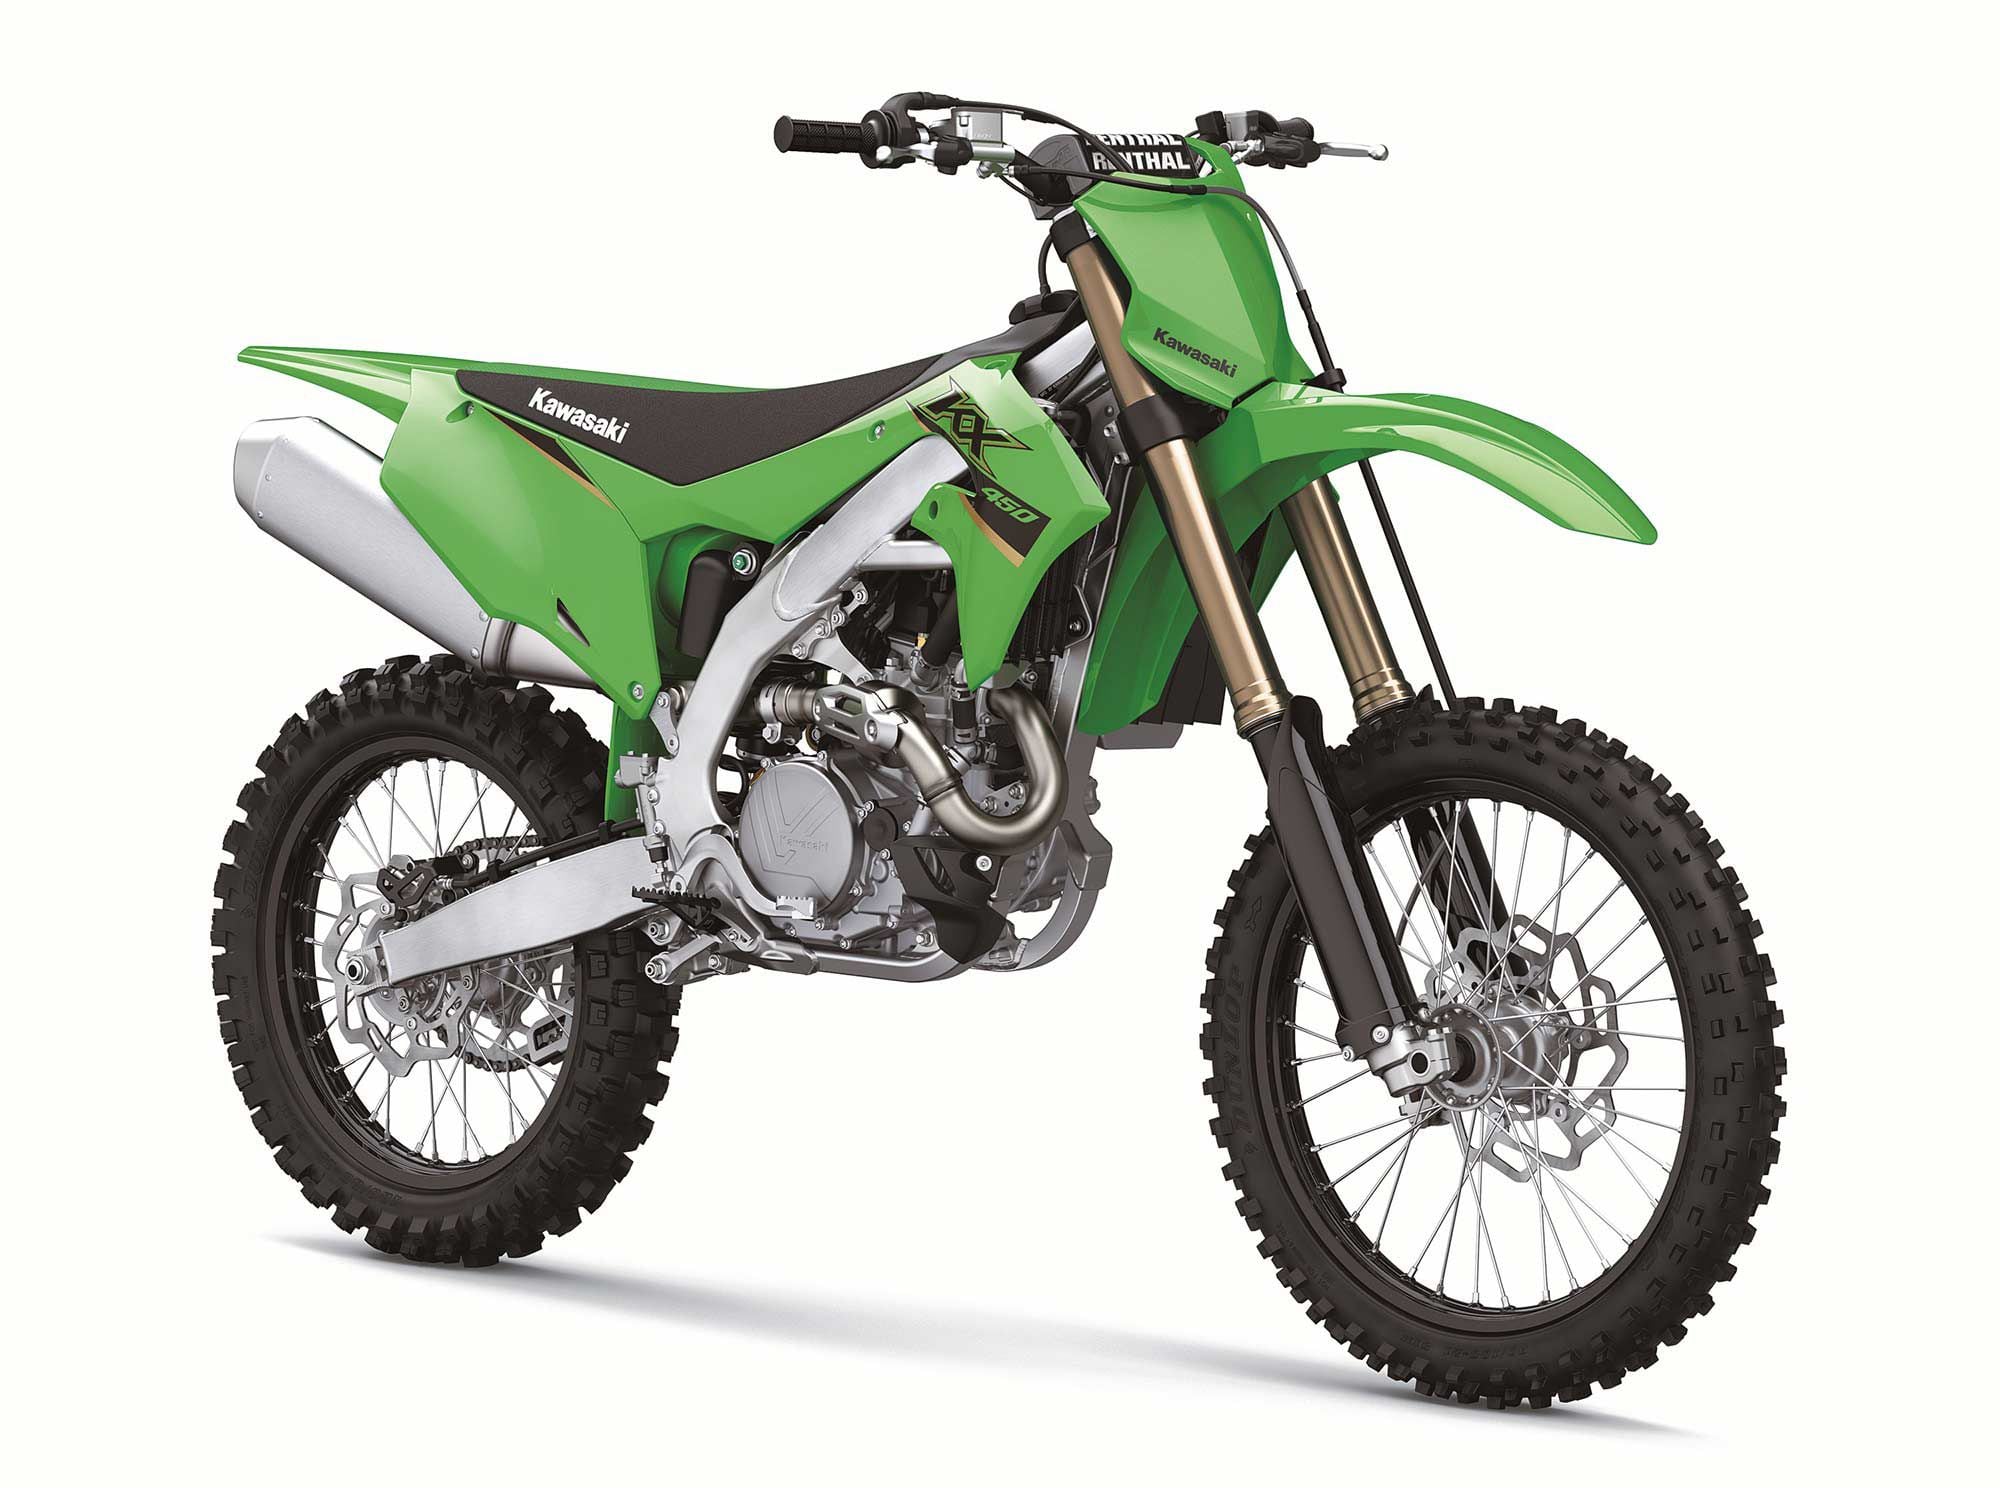 The 2022 Kawasaki KX450 measured 52.2 hp and 32.4 pound-feet of torque on our in-house dyno.